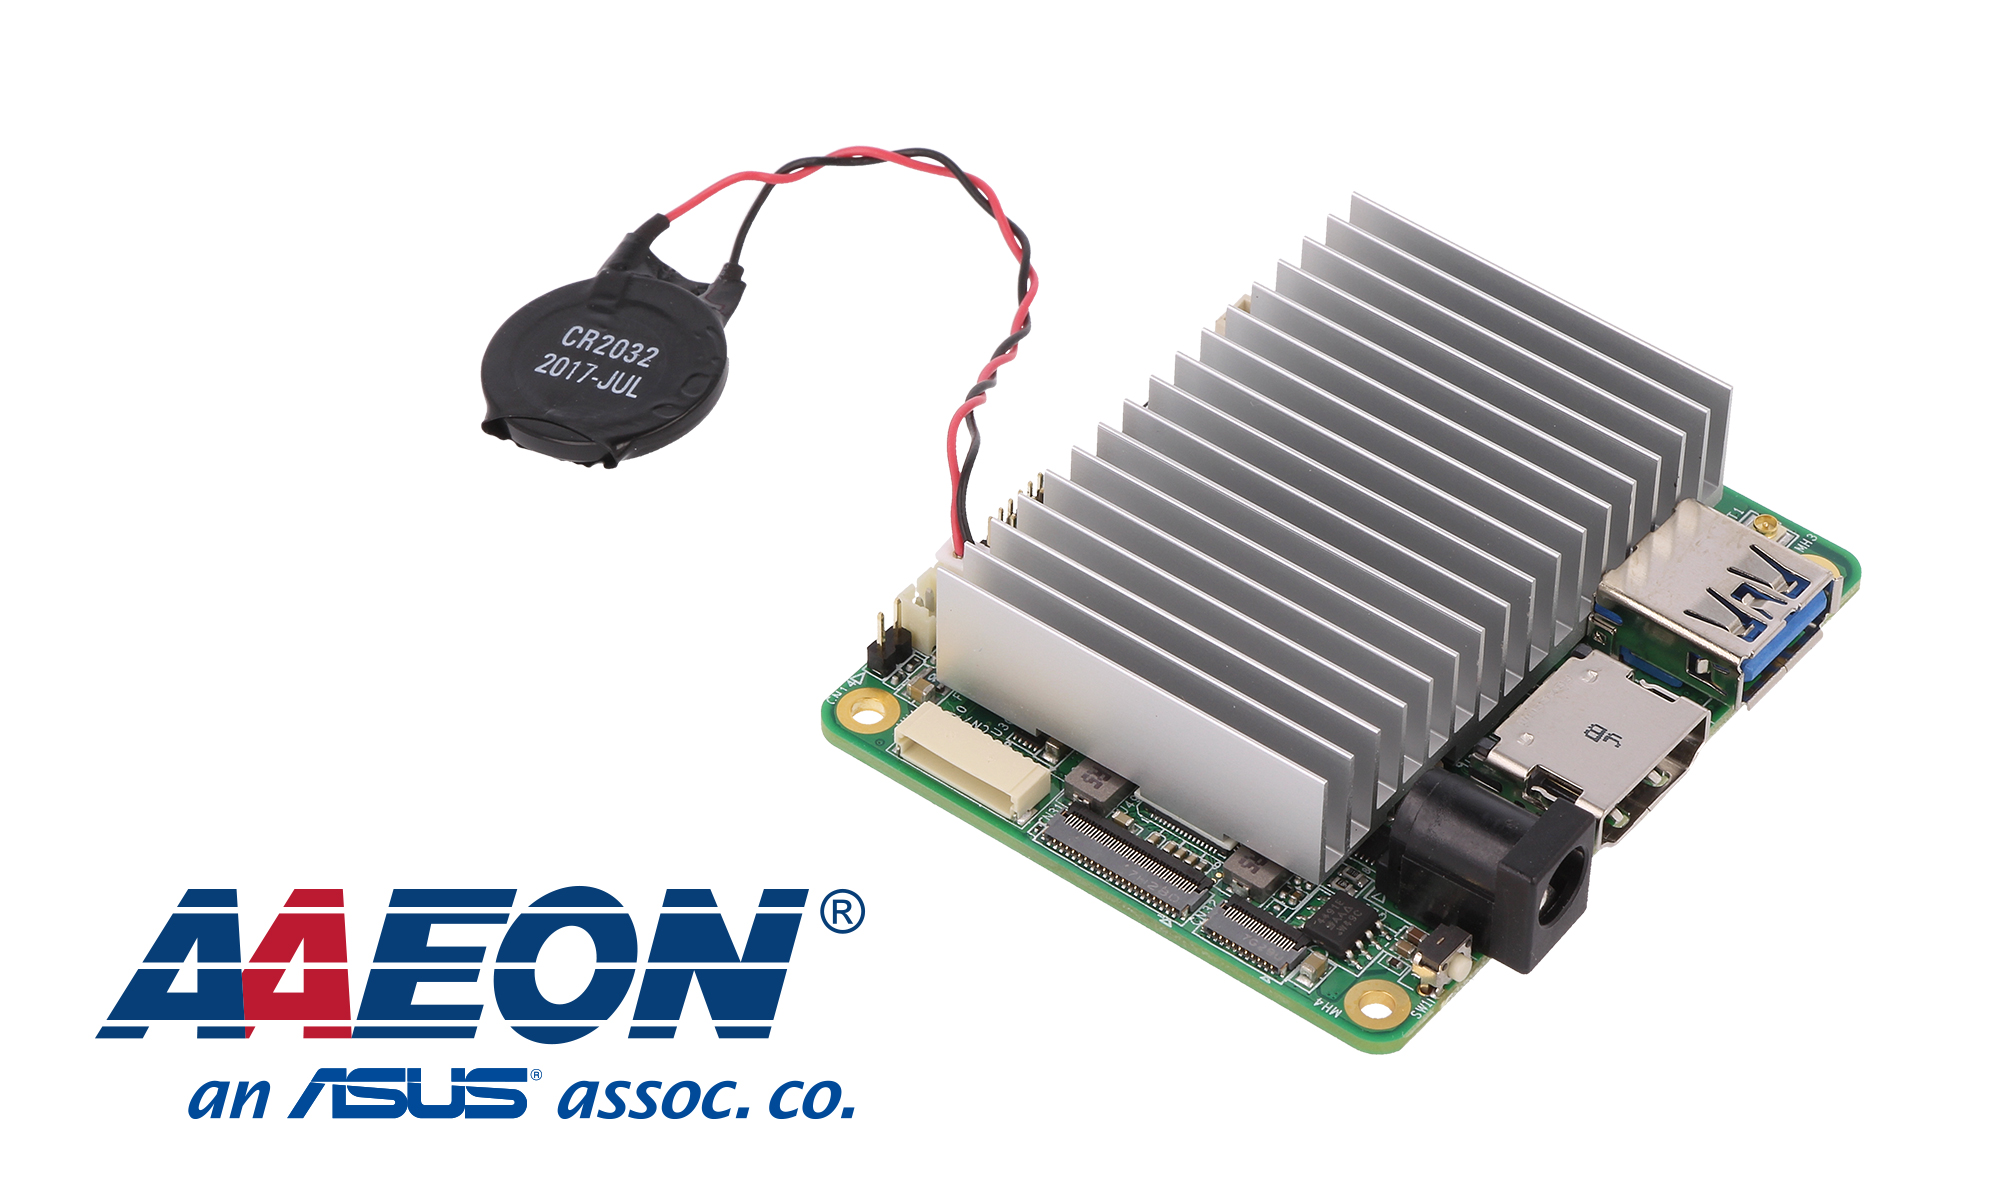 Compact quad\-core computer by AAEON